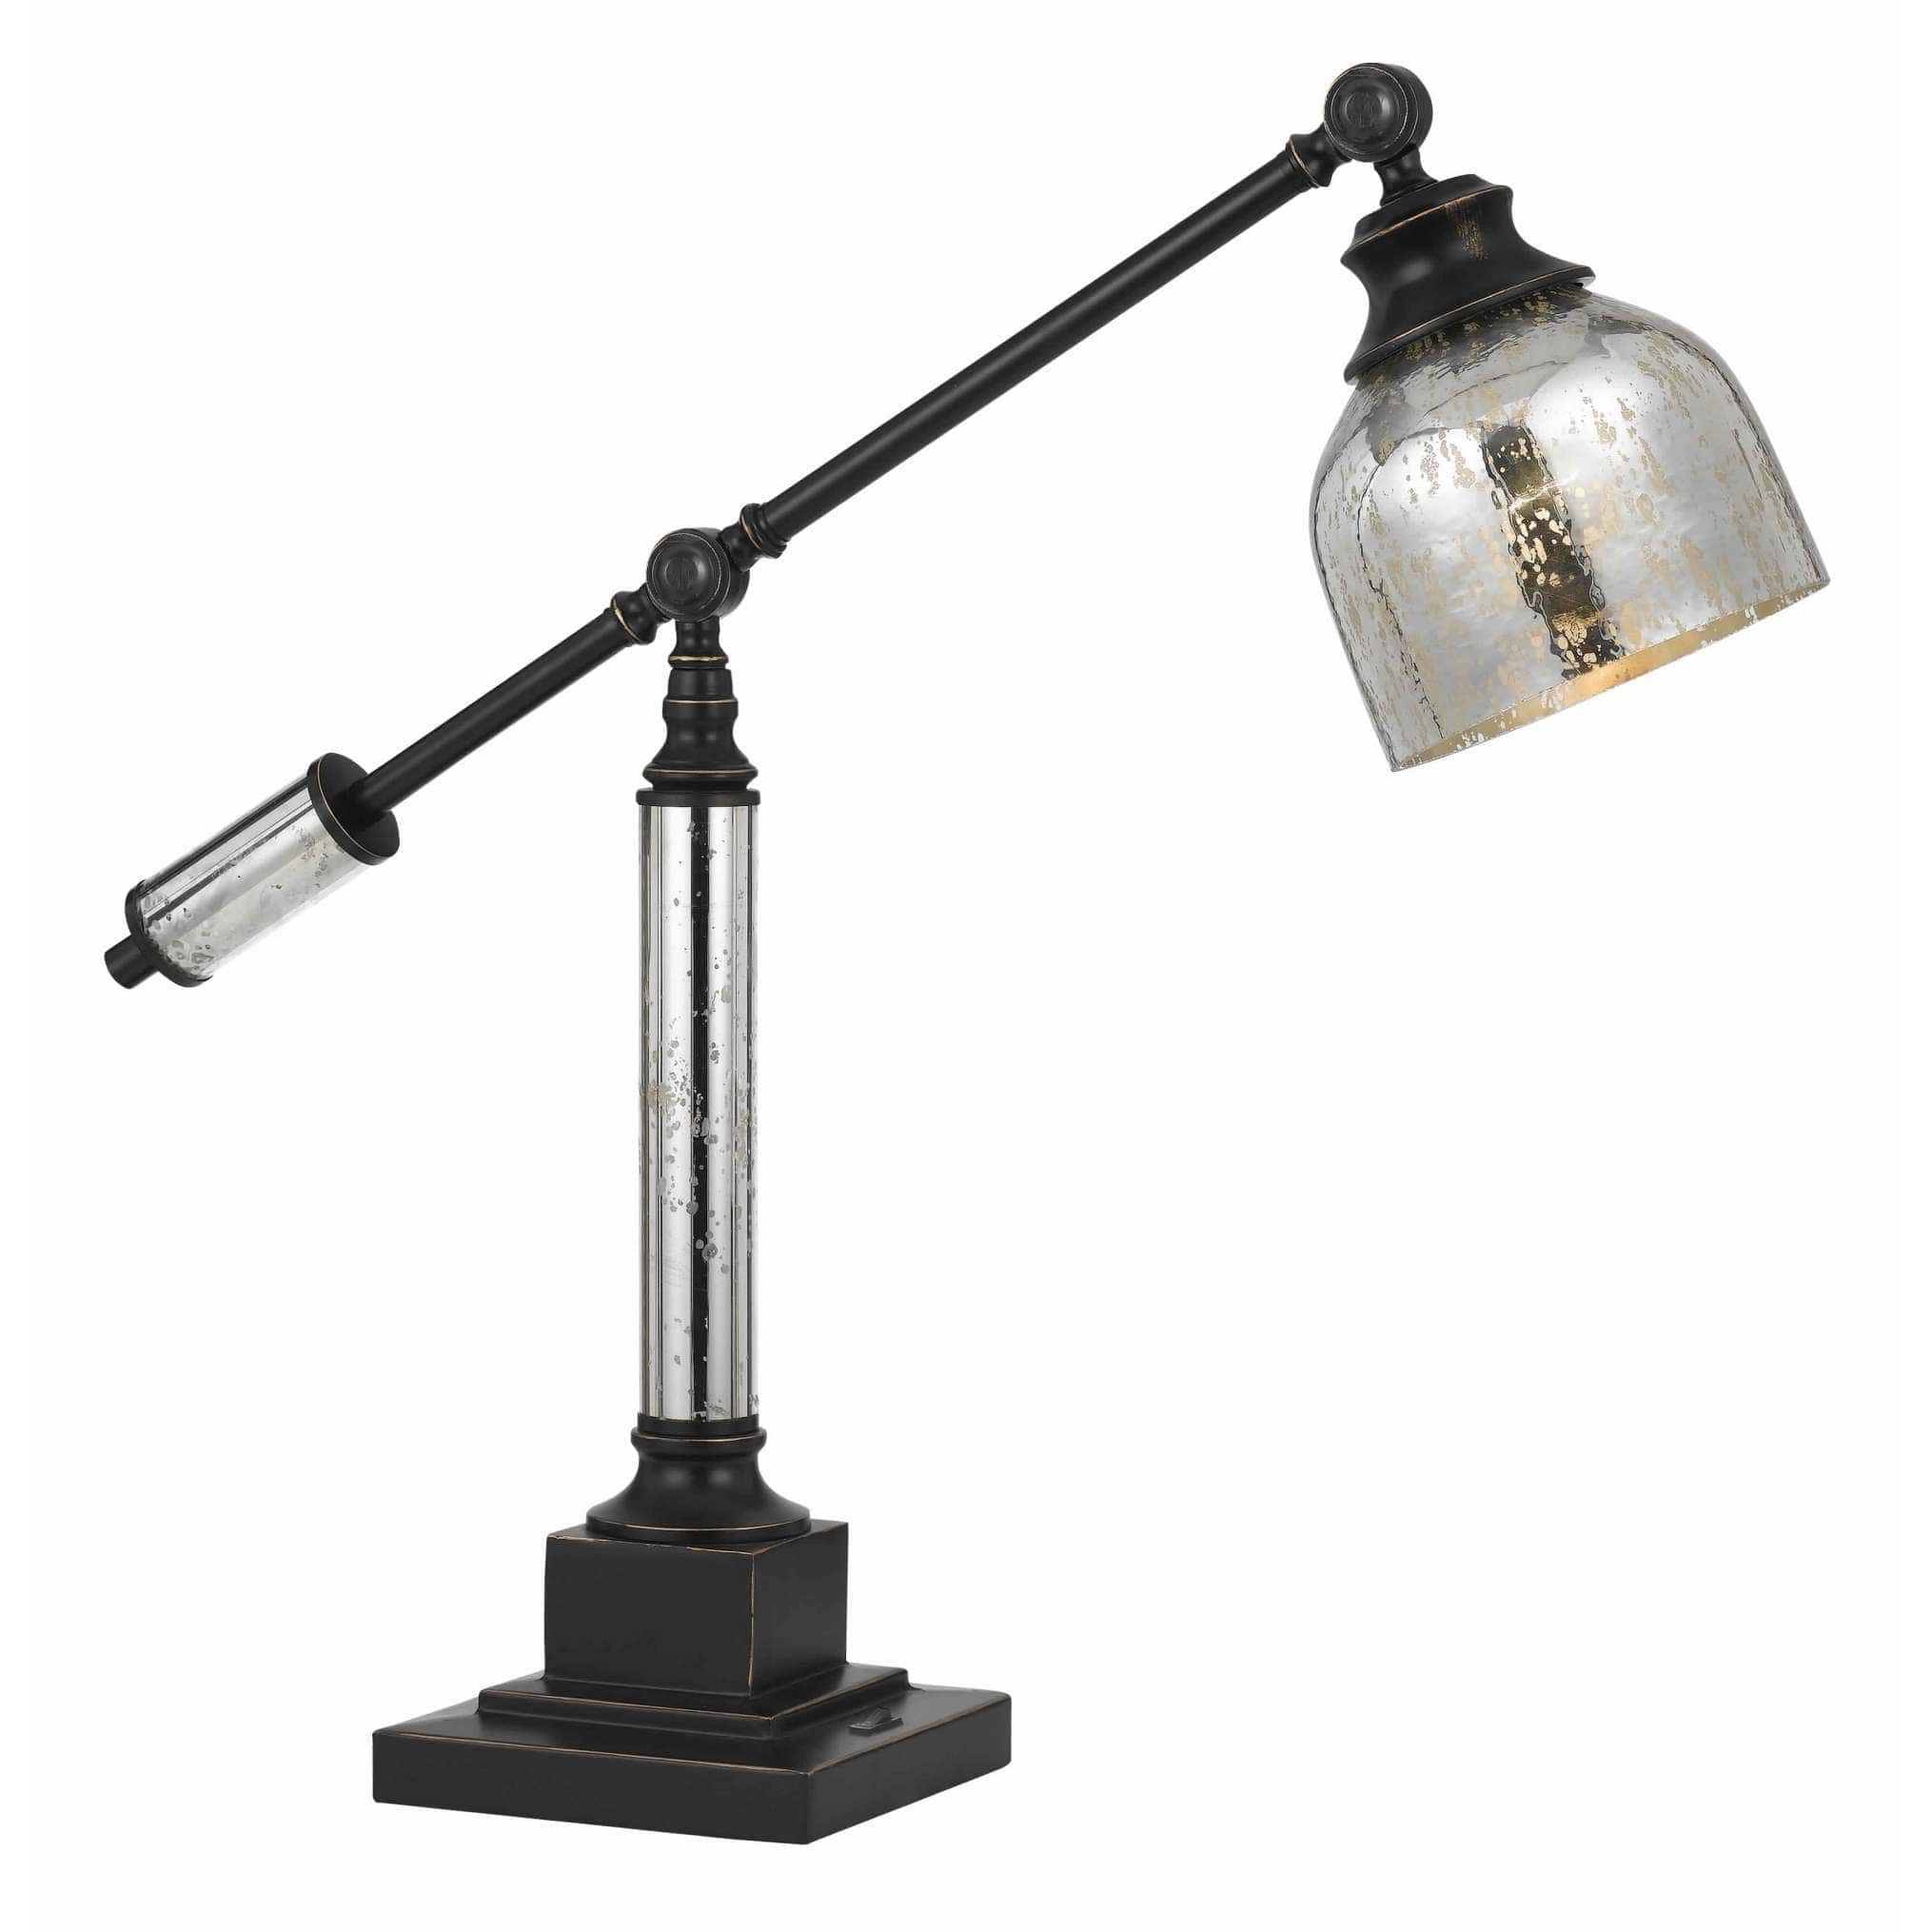 Benzara 60 Watt Metal Body Table Lamp With Dome Glass Shade, Black And Silver By Benzara Desk Lamps BM223590